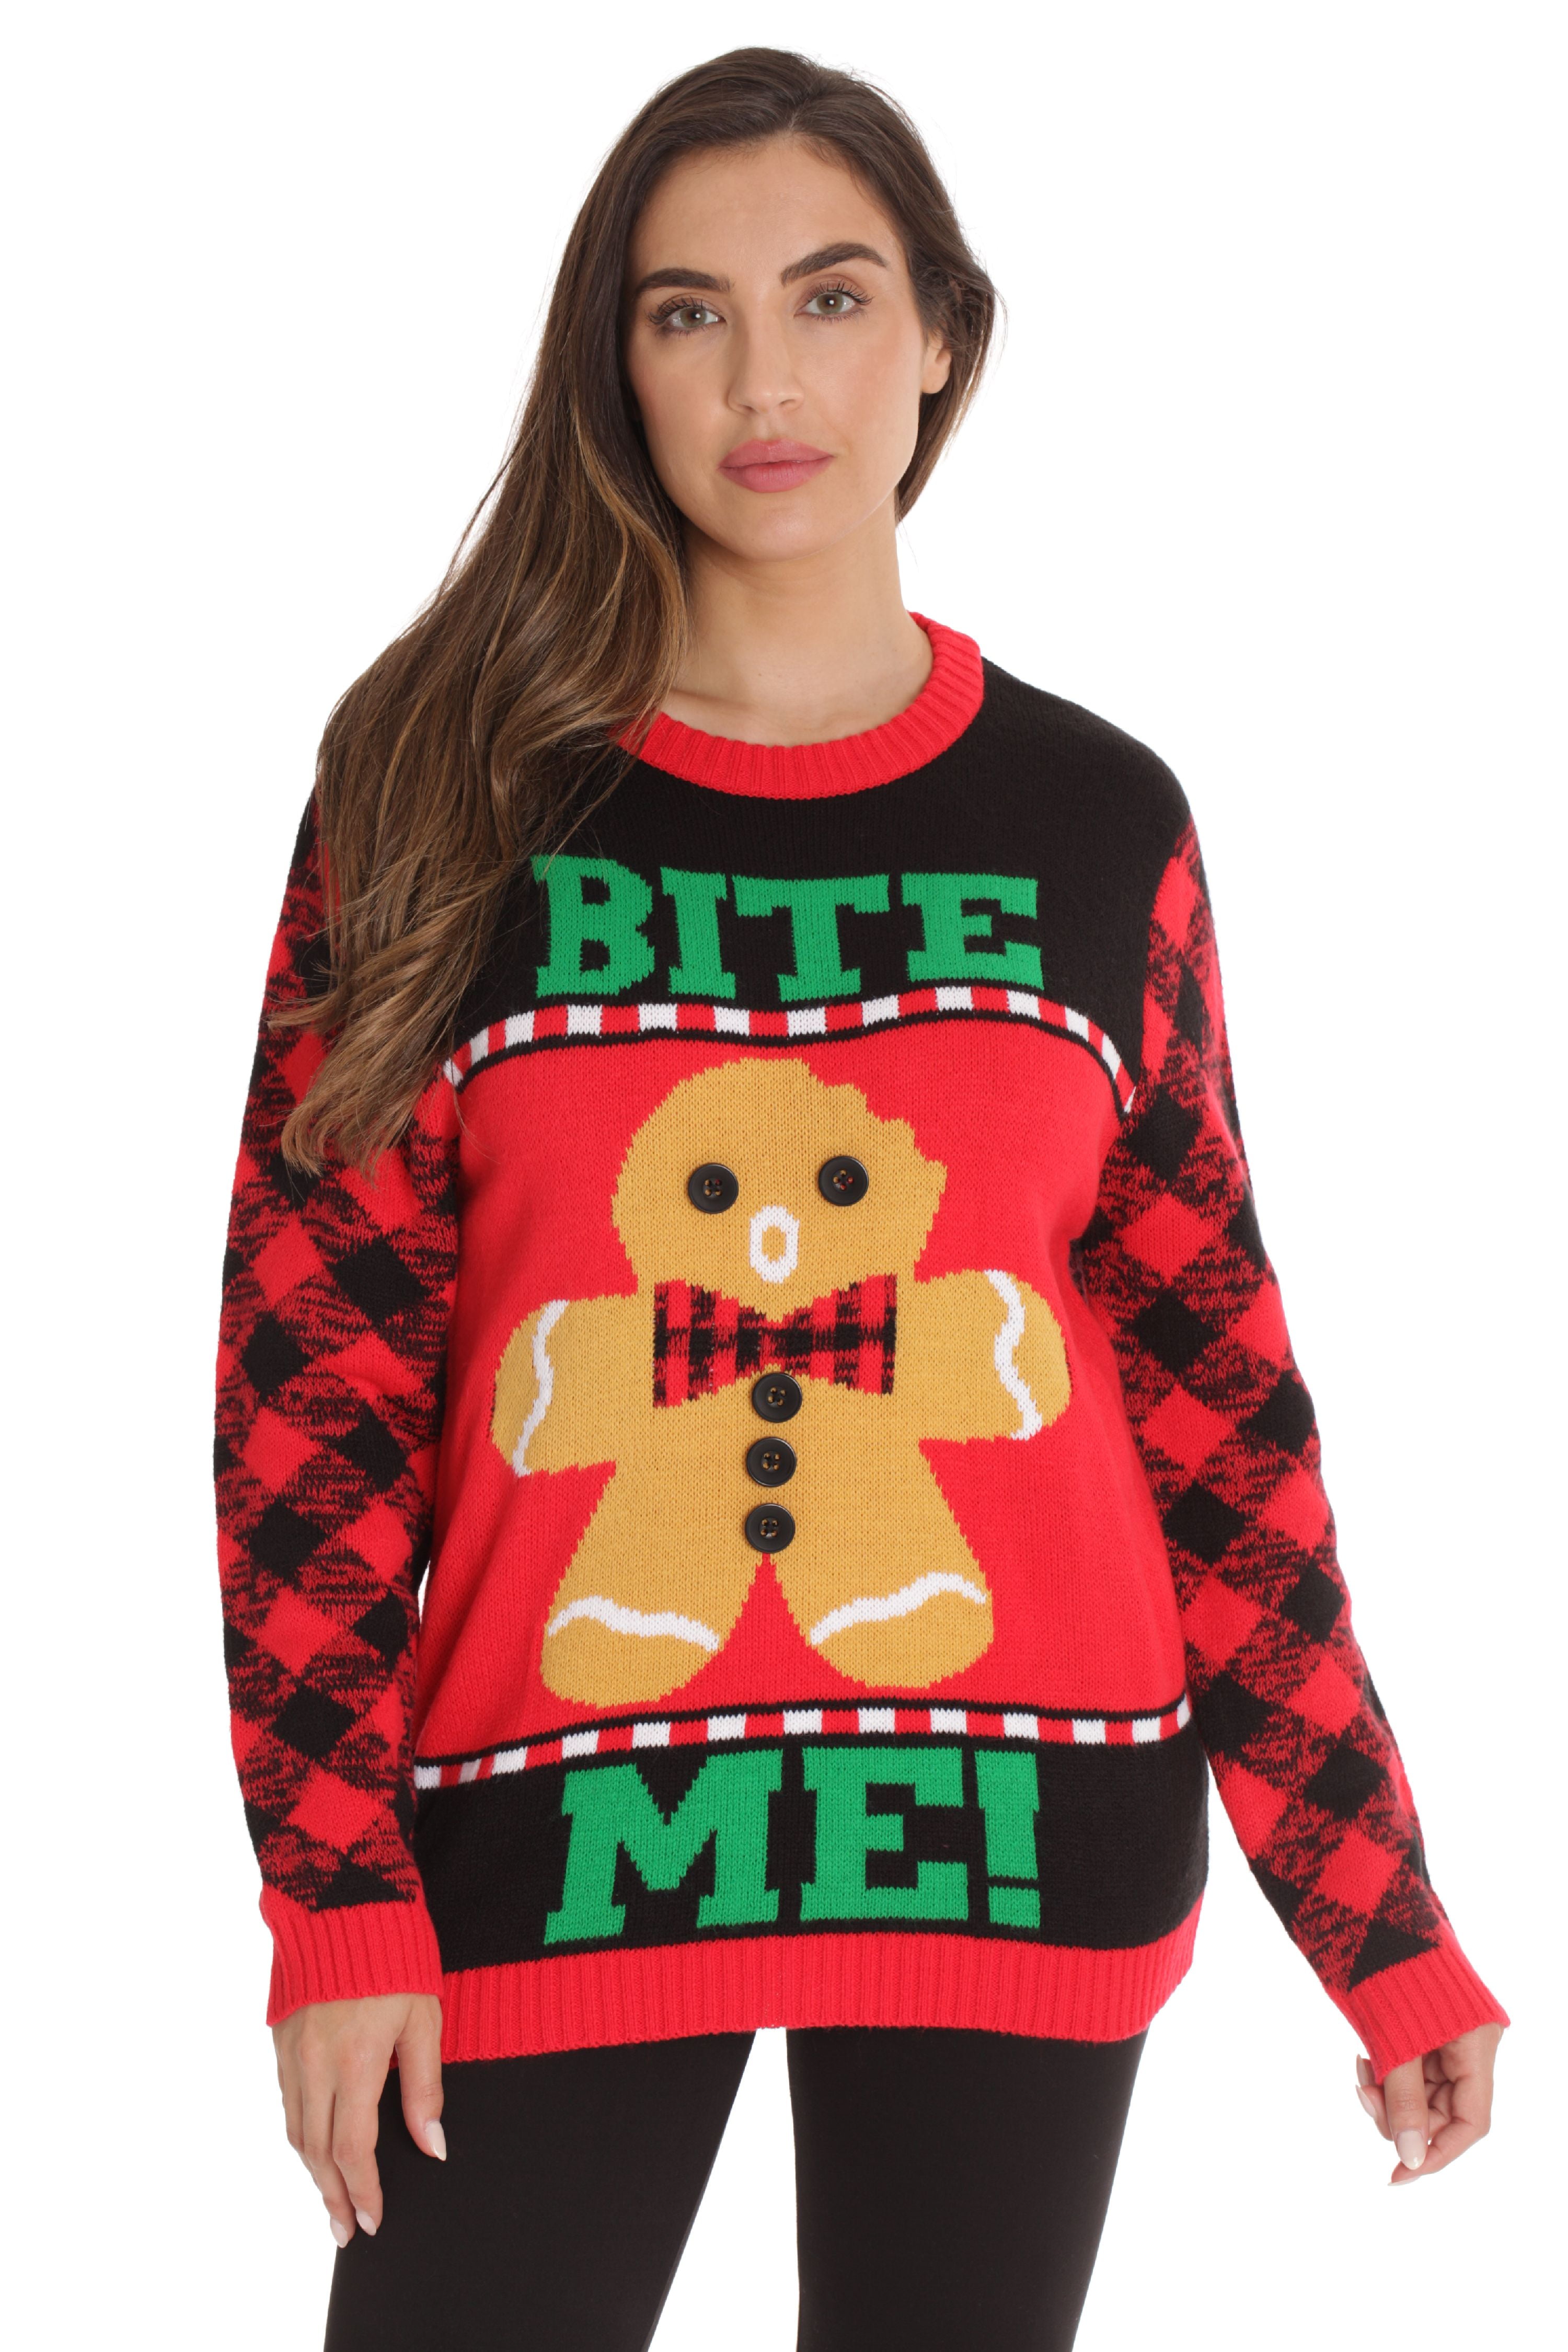 #followme Womens Ugly Christmas Sweater - Sweaters for Women (Black ...